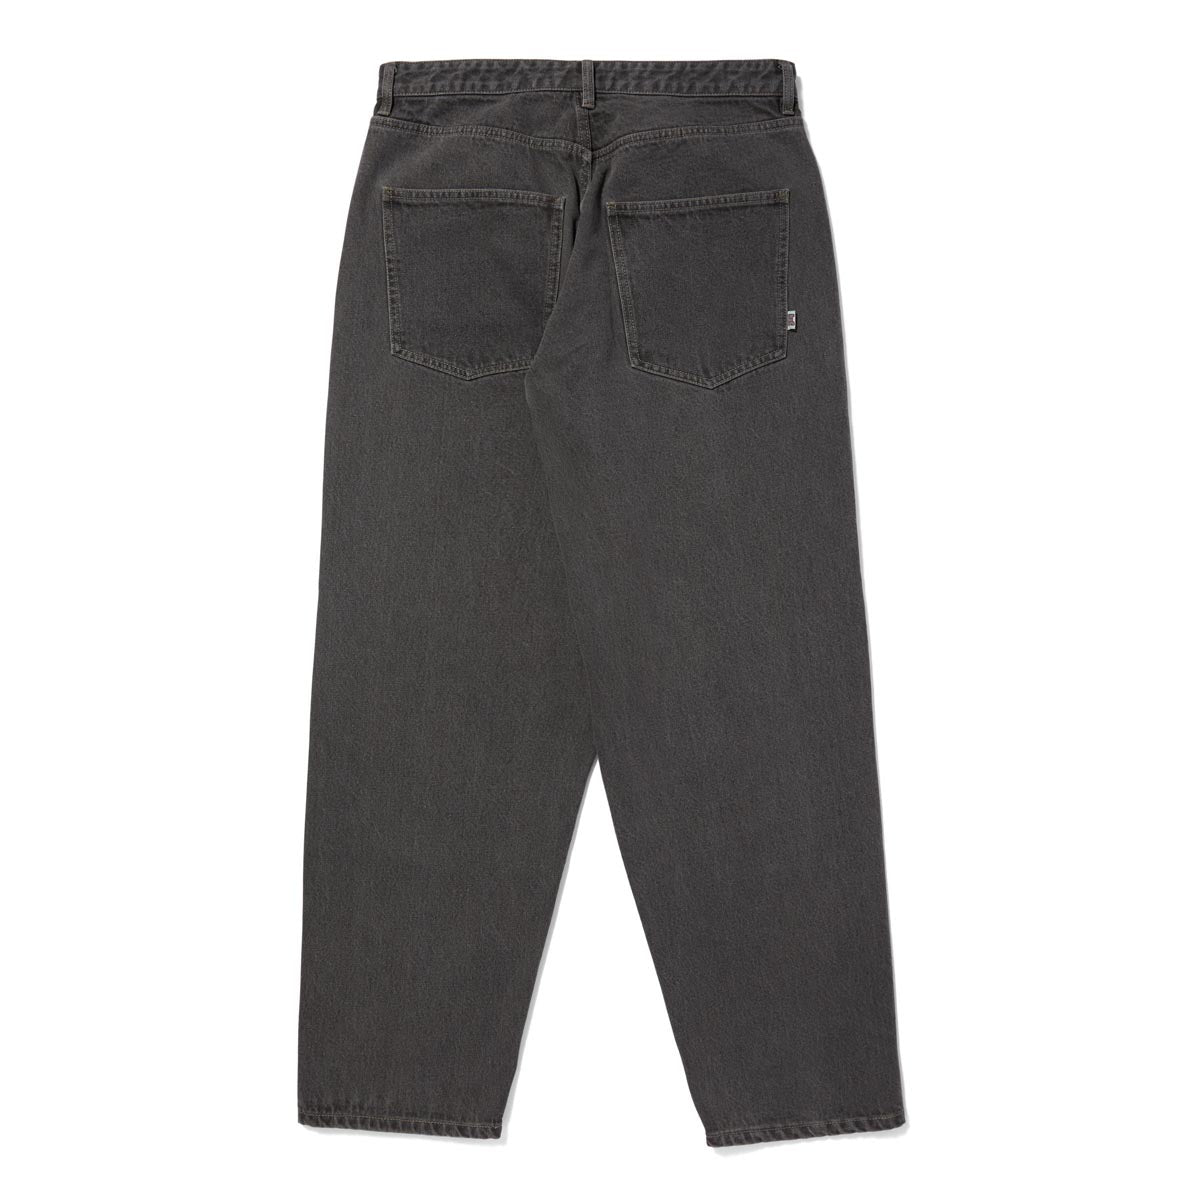 HUF Cromer Washed Pants - Frost Gray image 2